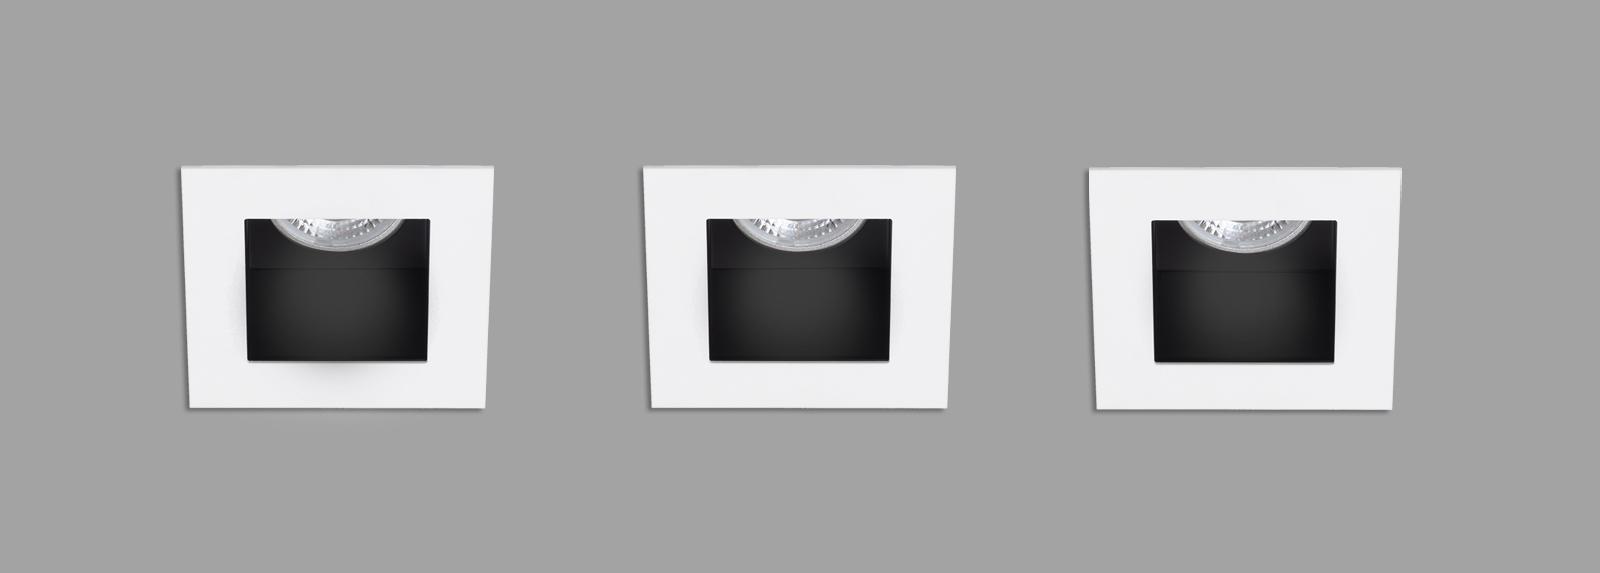 BAFFLE EVOLUTION SQ | Small recessed ceiling-mounted downlights